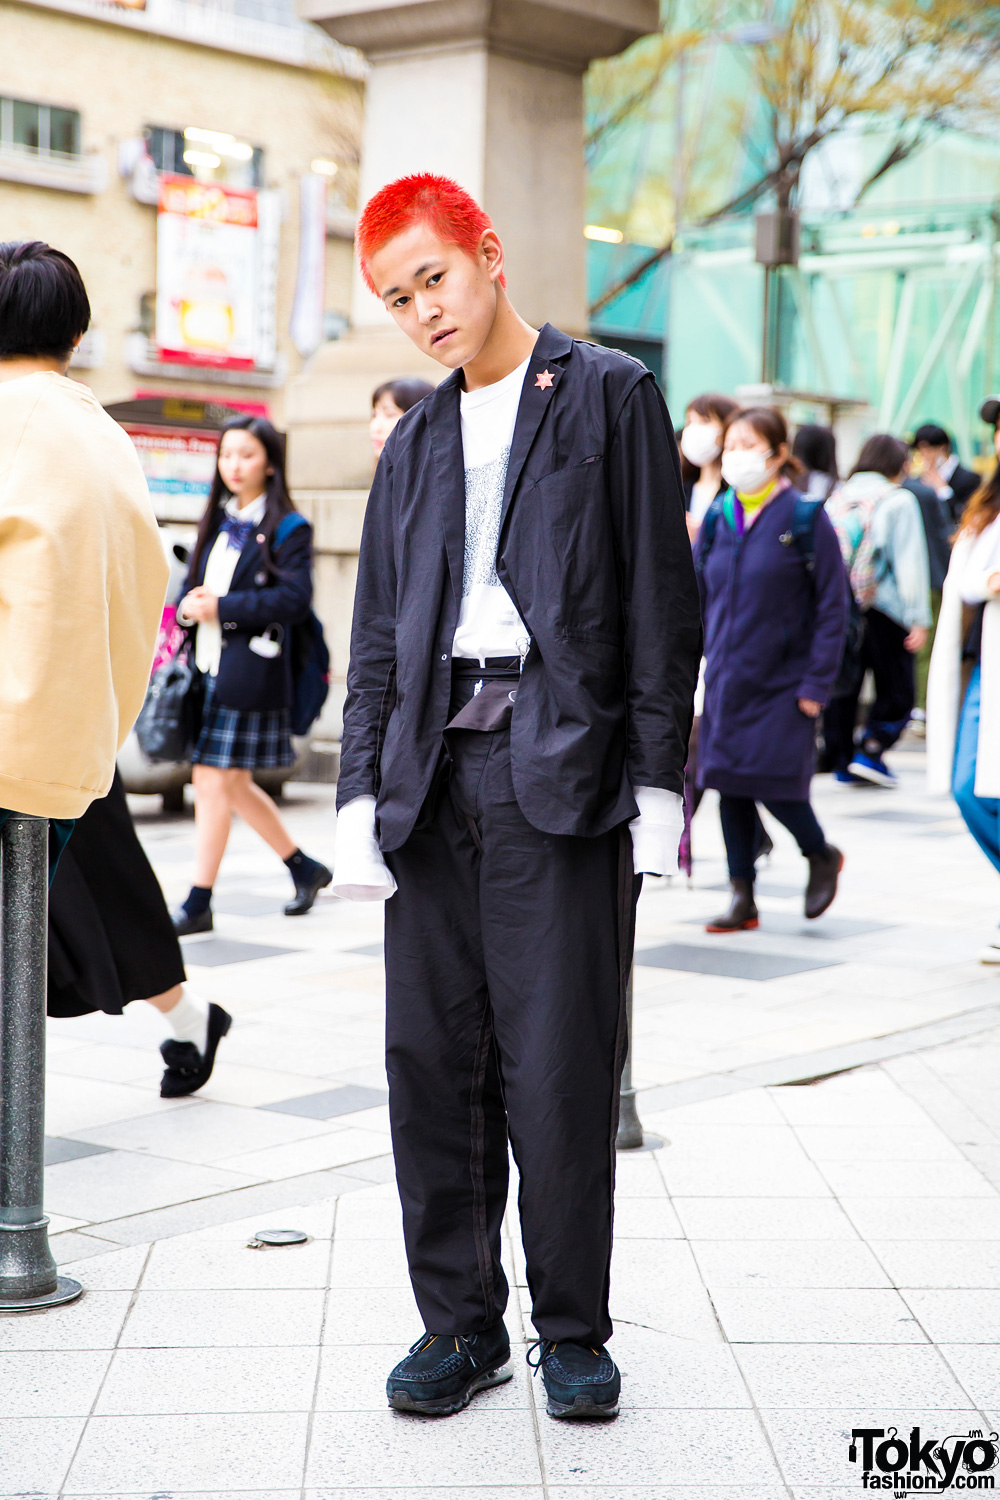 Red-Haired Harajuku Guy in Phingerin Outfit – Tokyo Fashion